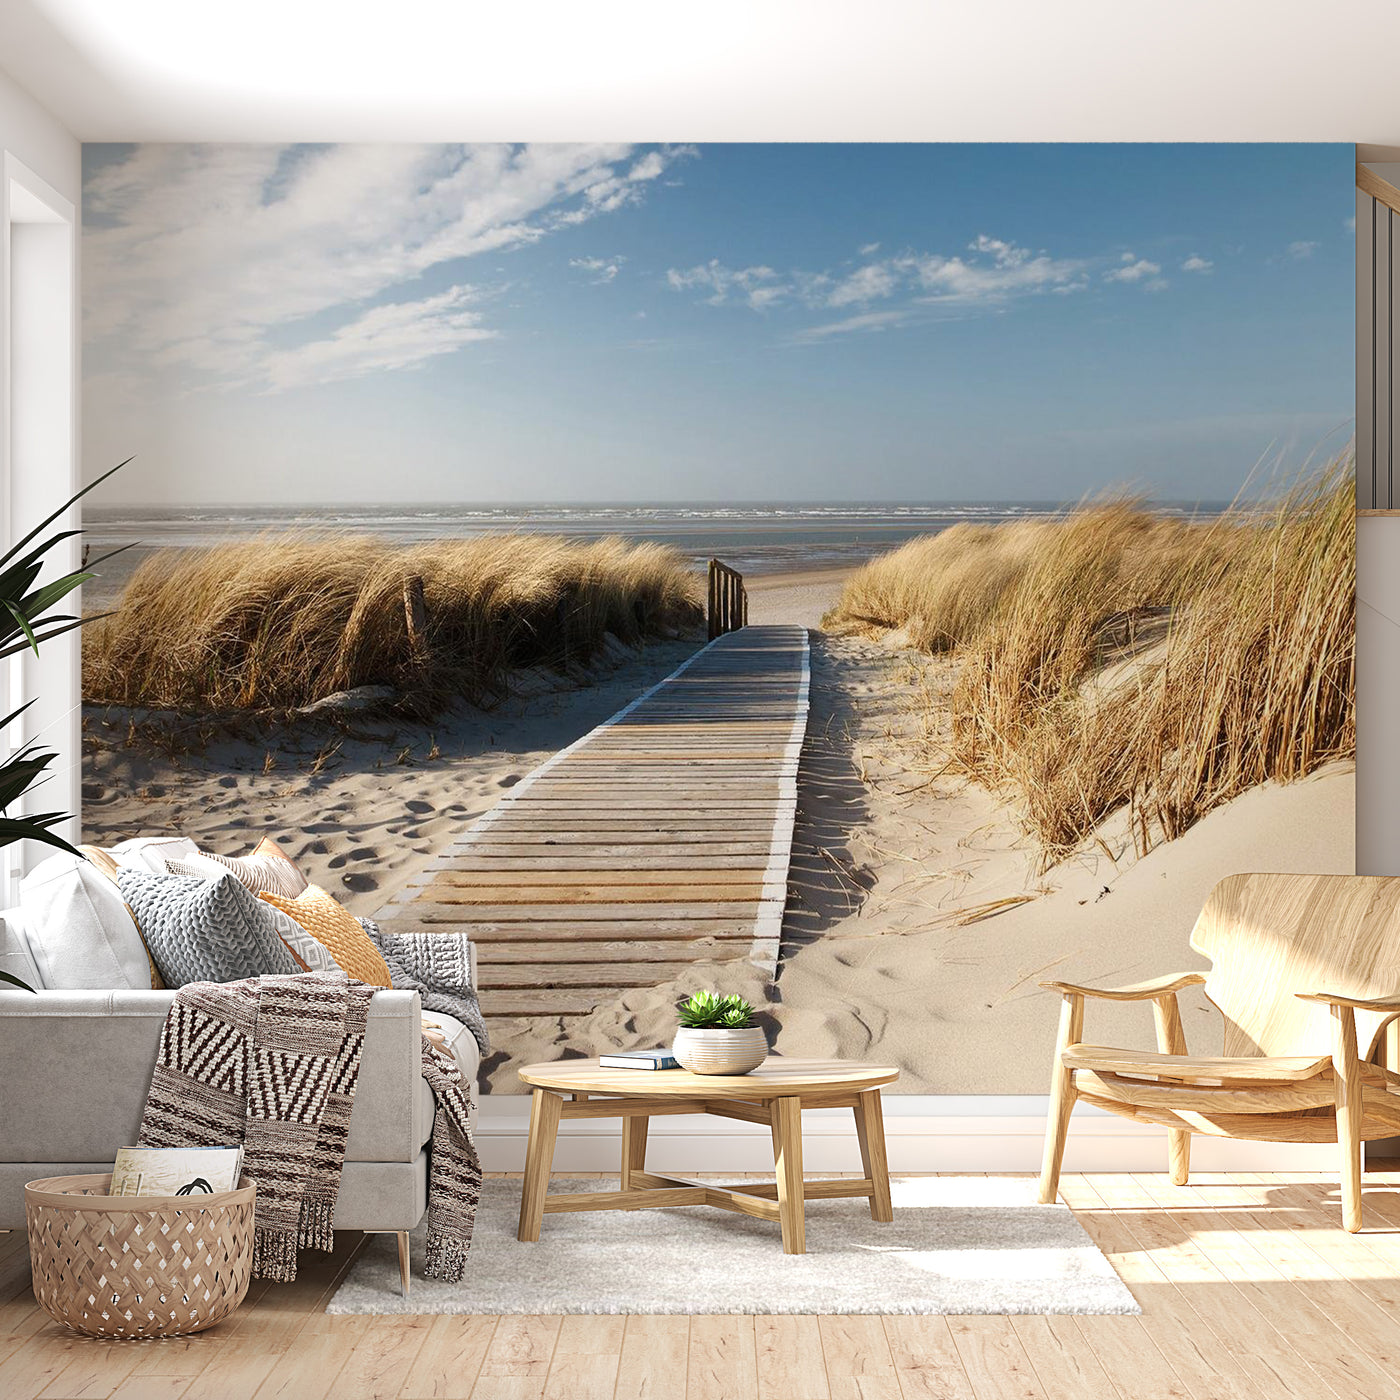 Peel & Stick Beach Wall Mural - Lonely Beach - Removable Wall Decals